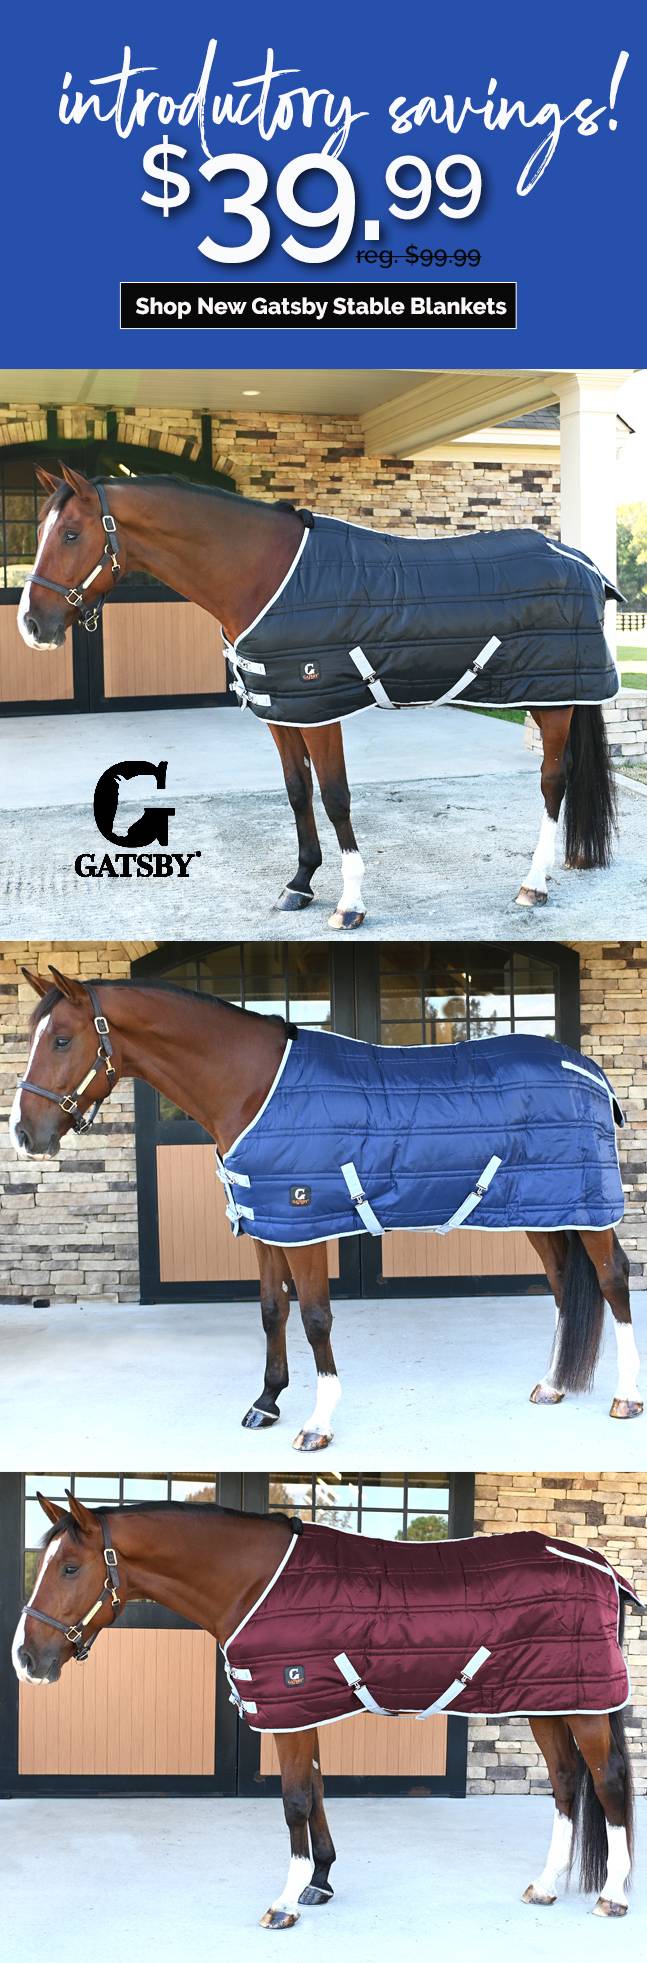 NEW! Gatsby 400g Stable Blanket Perfect For Cold-Winter Weather